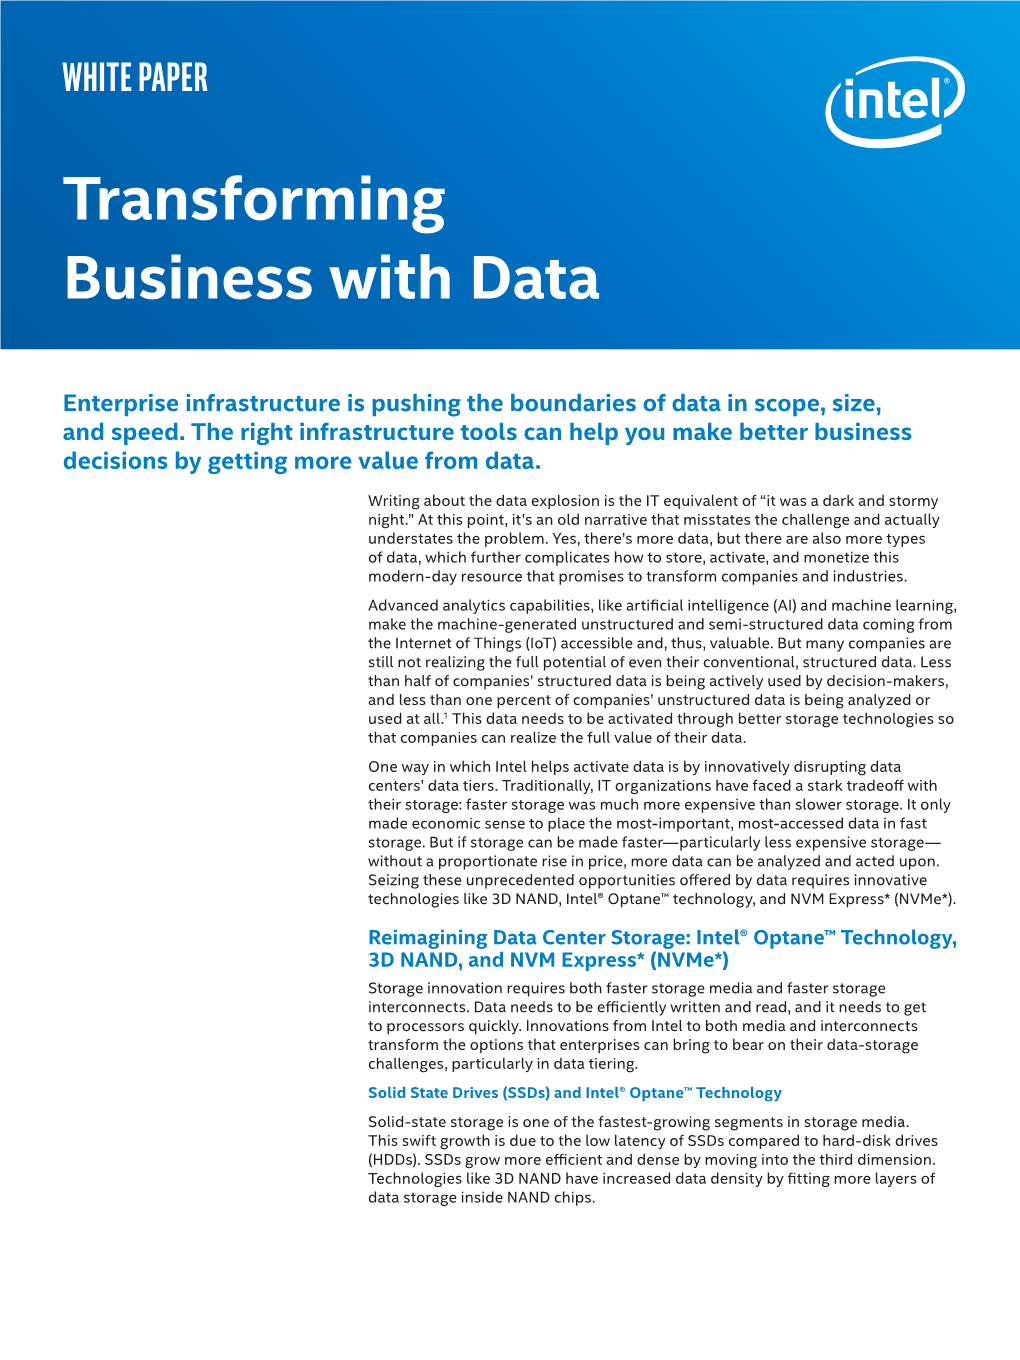 Transforming Business with Data